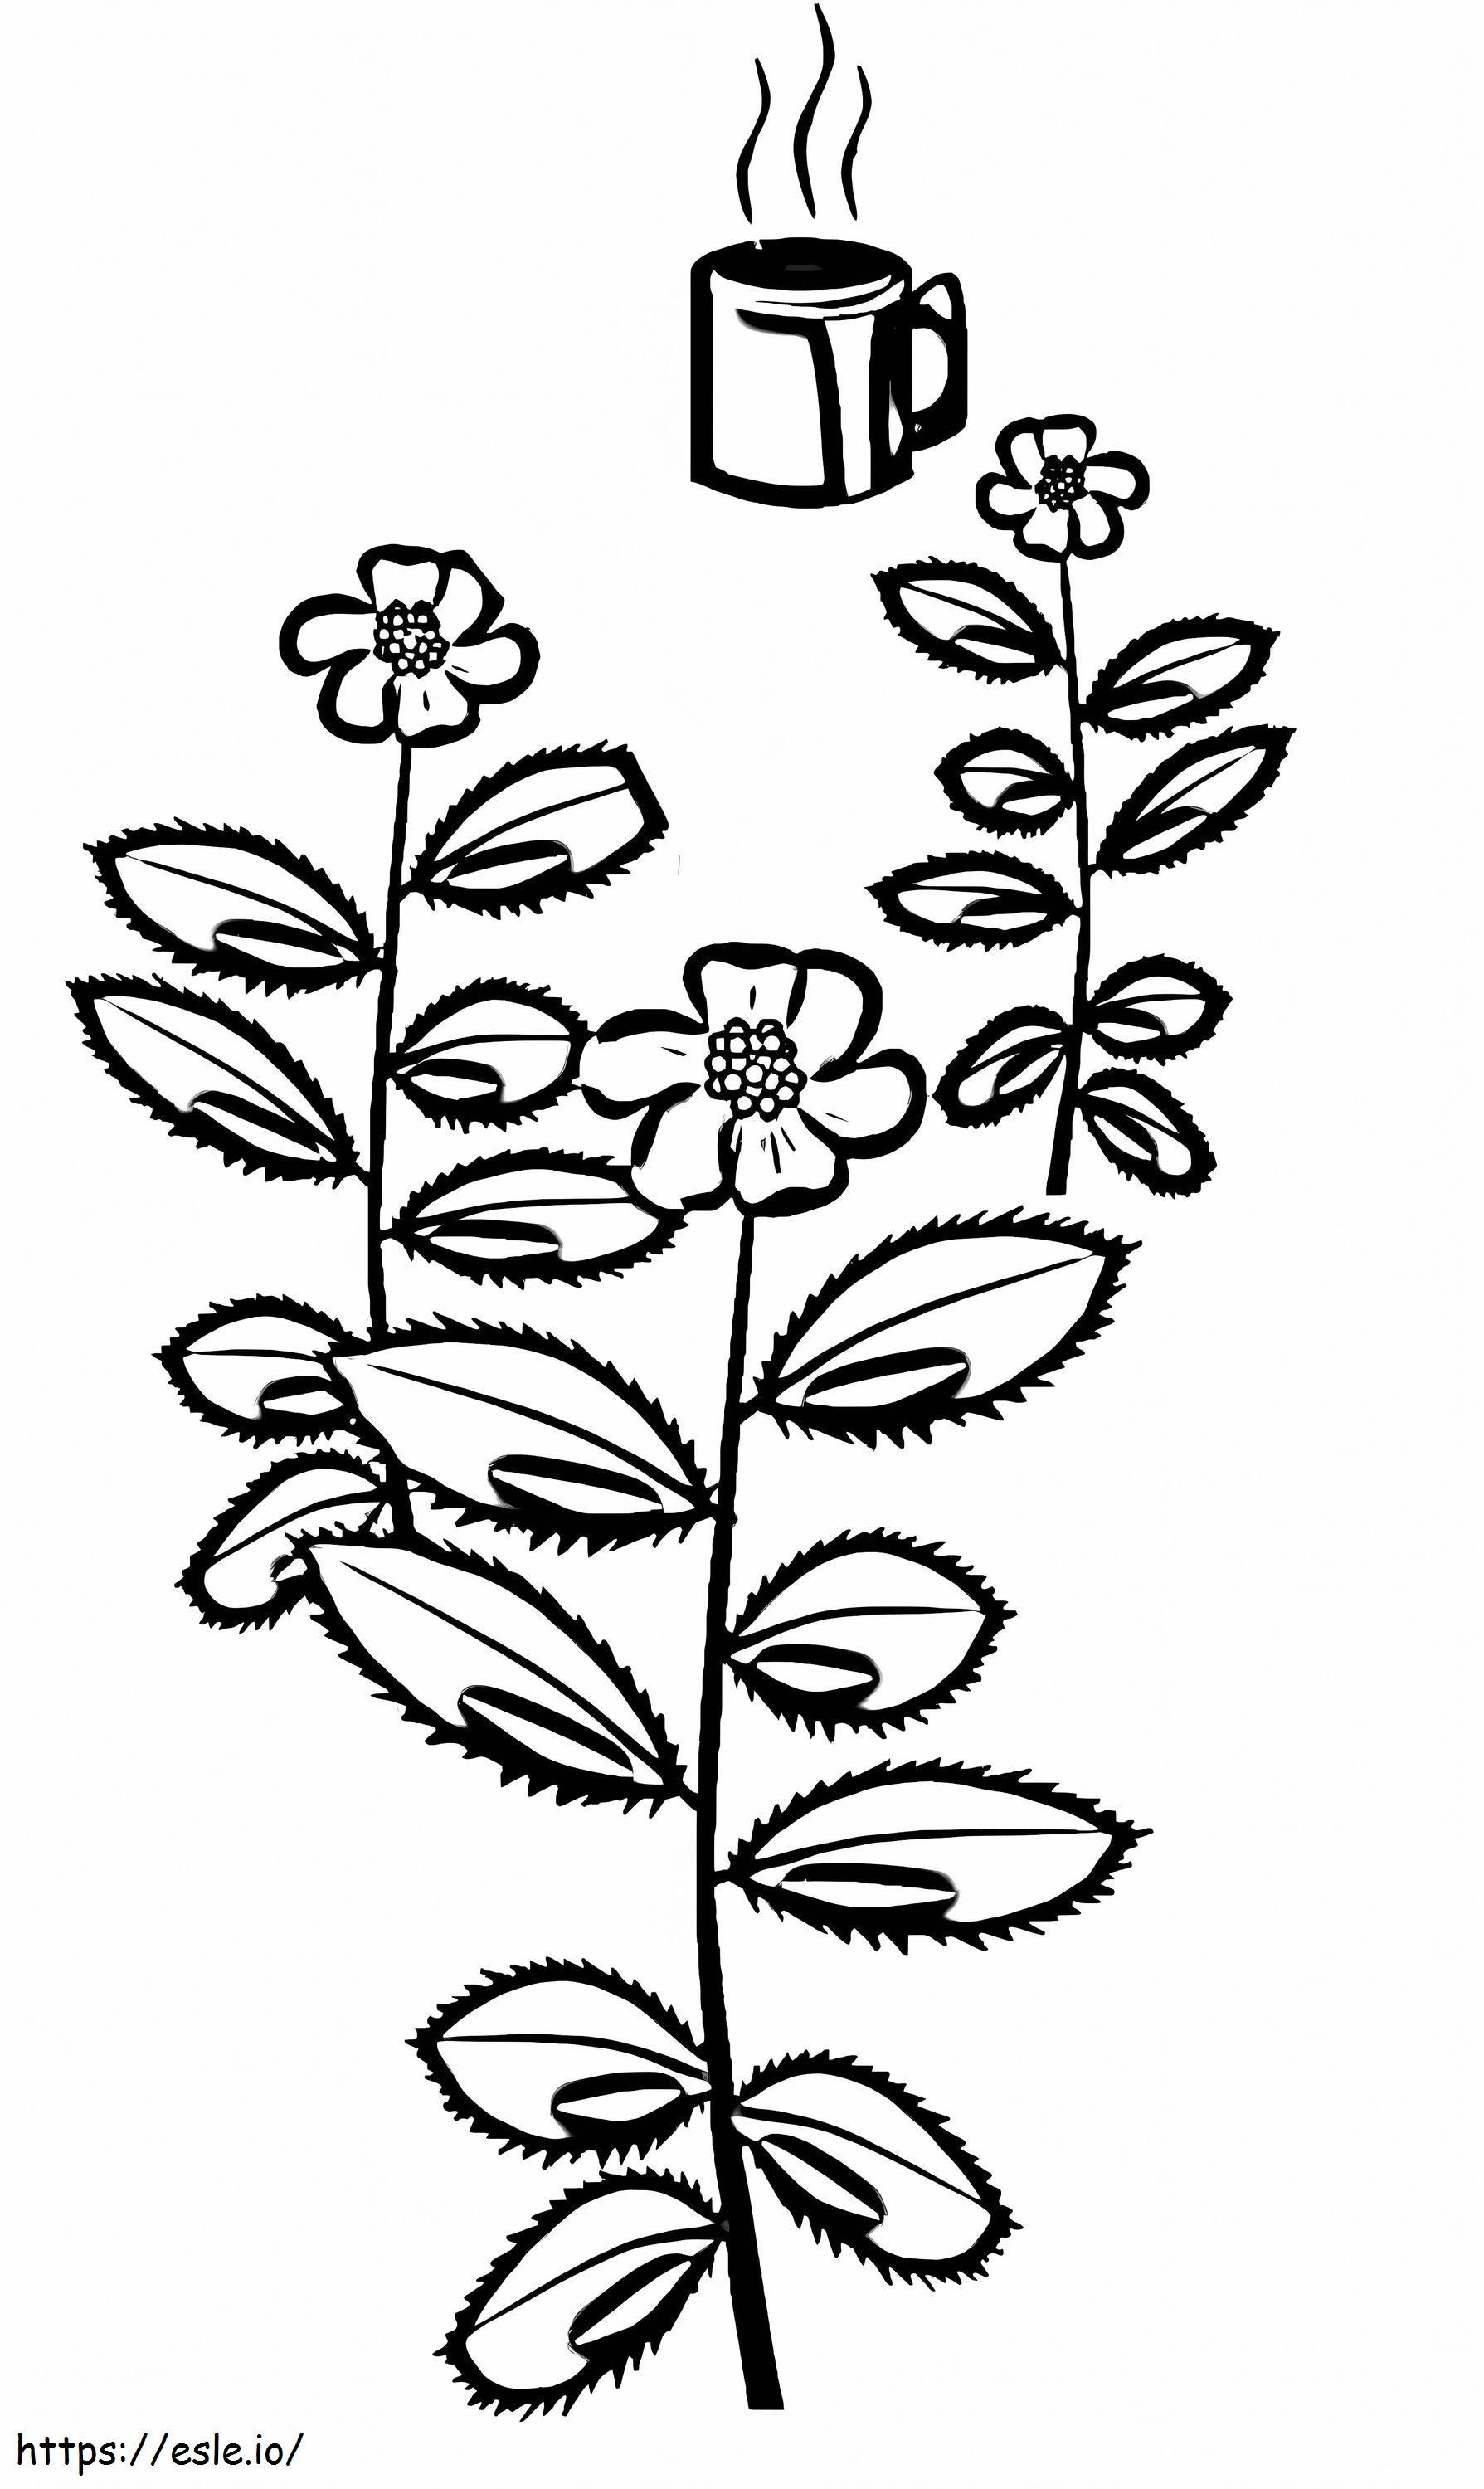 Tea In India coloring page